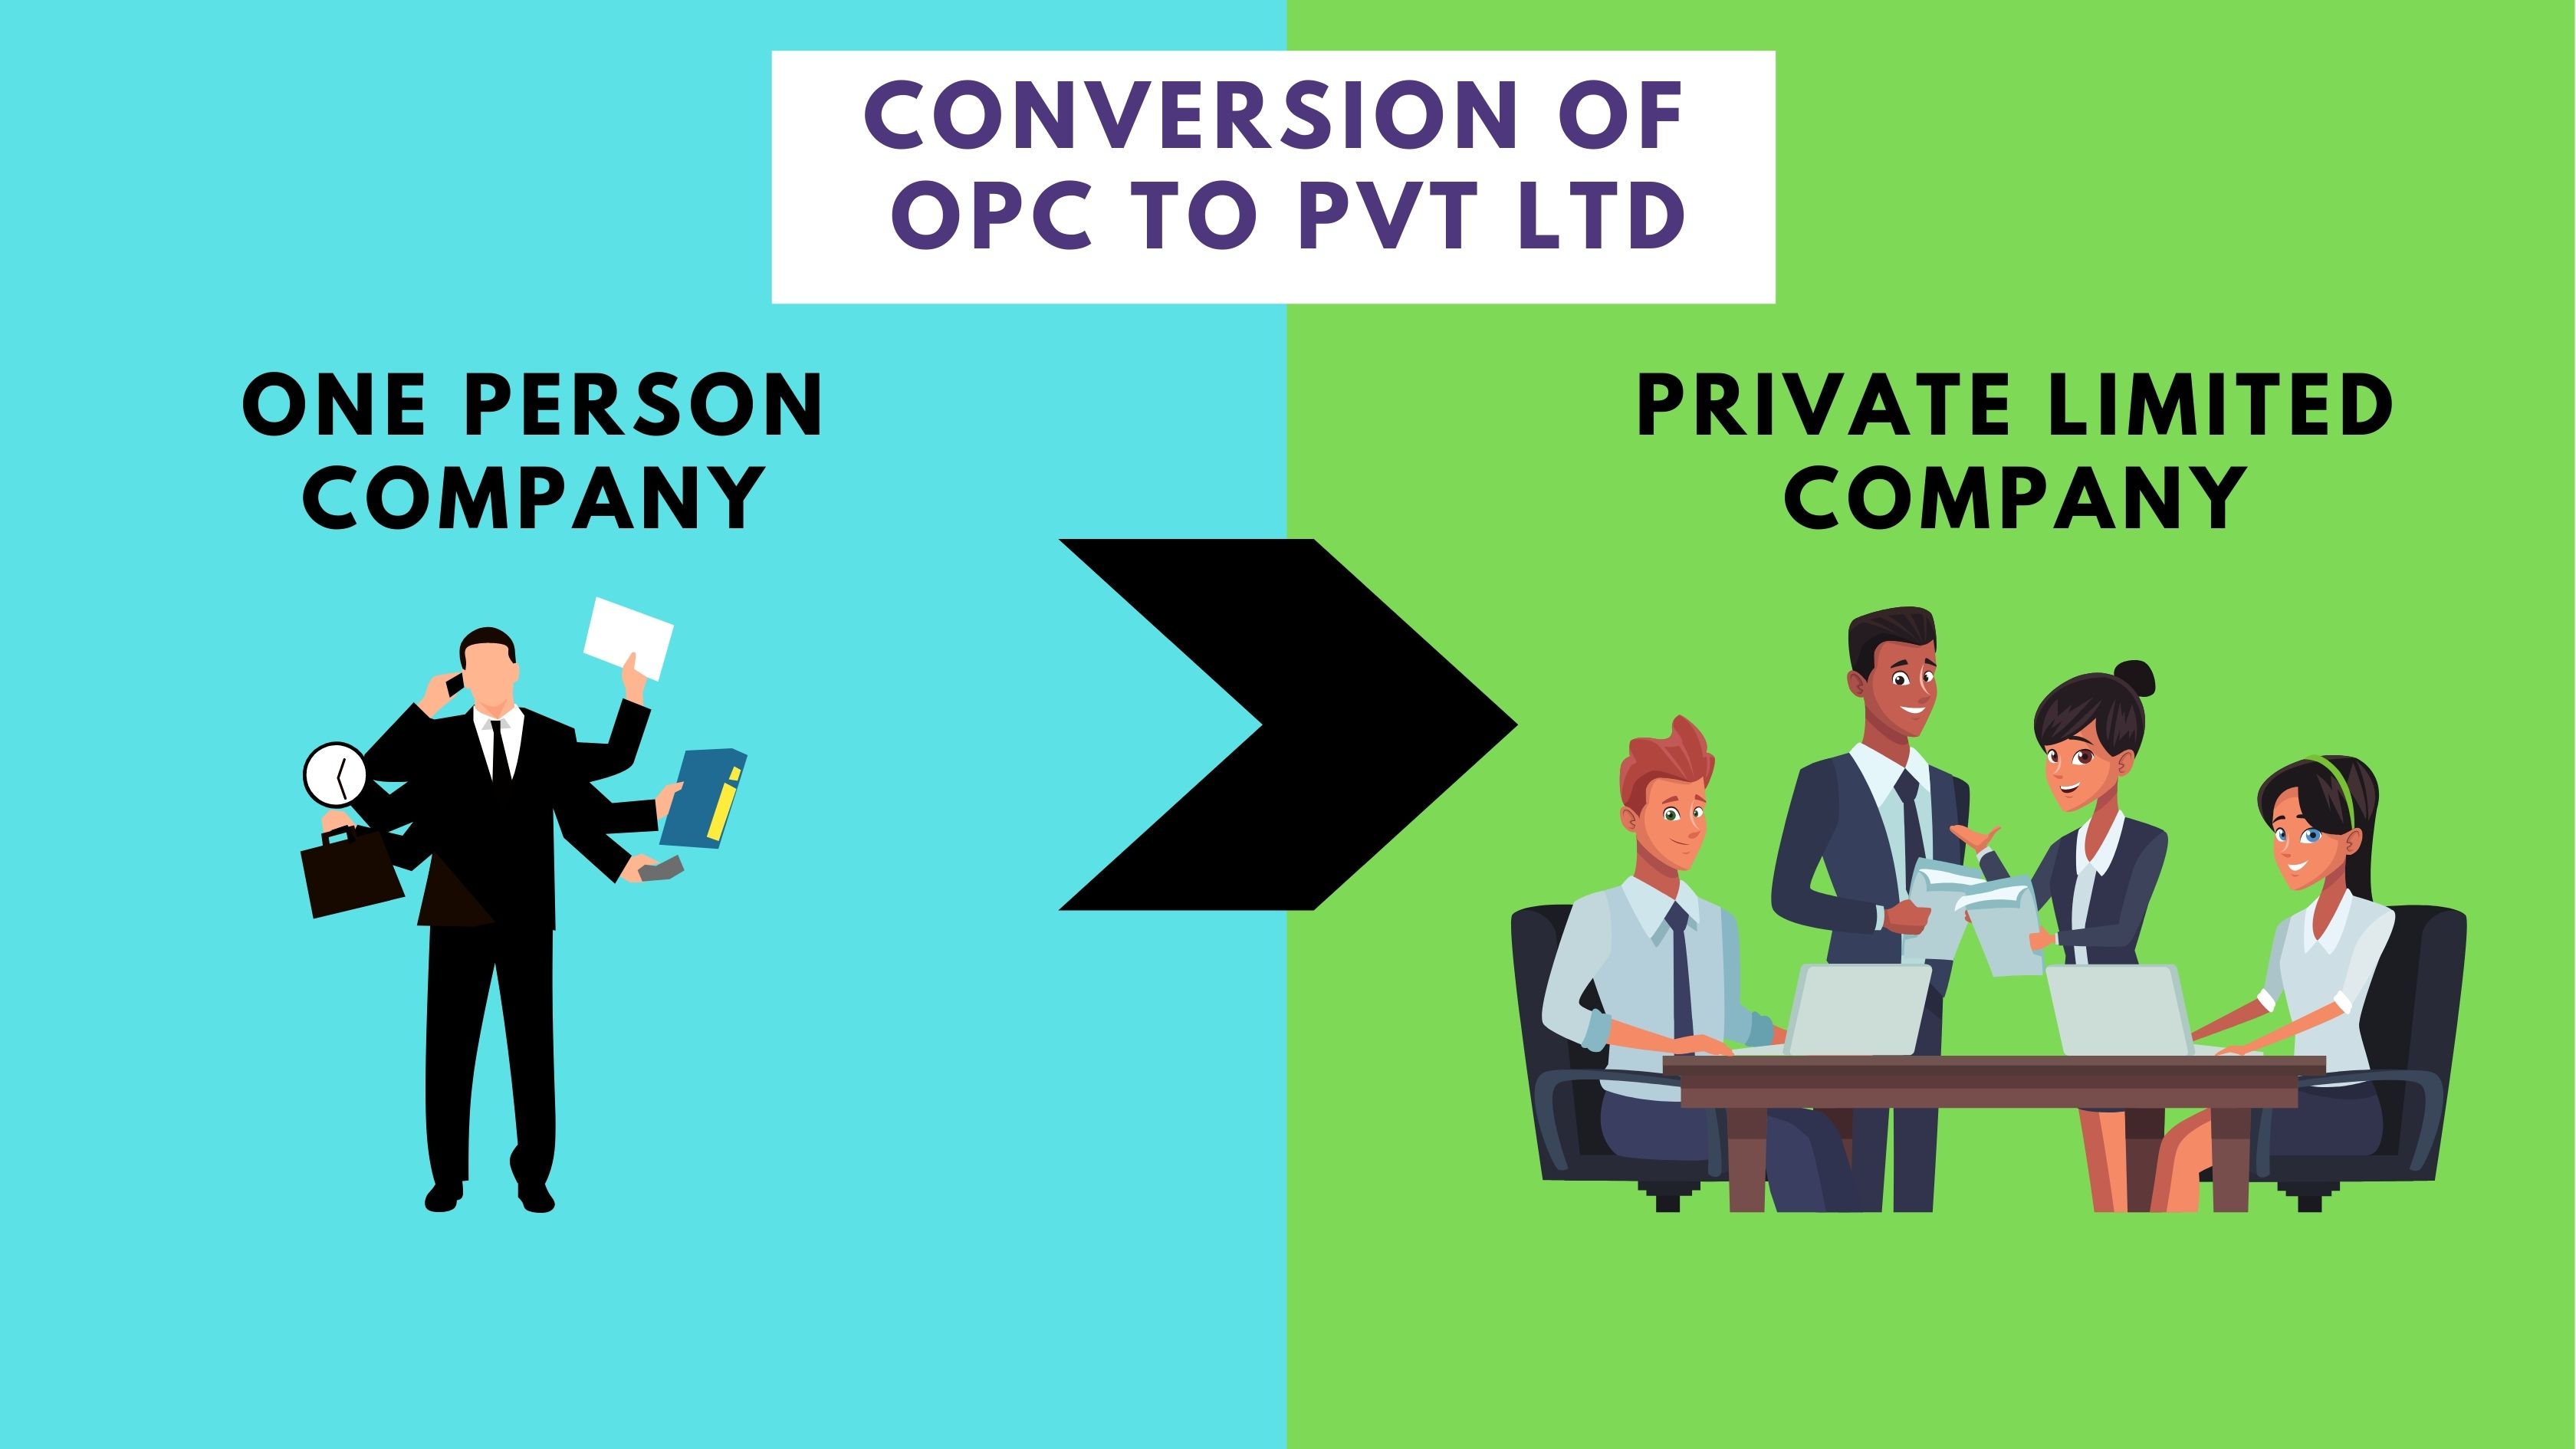 Conversion of One person company to Private limited company